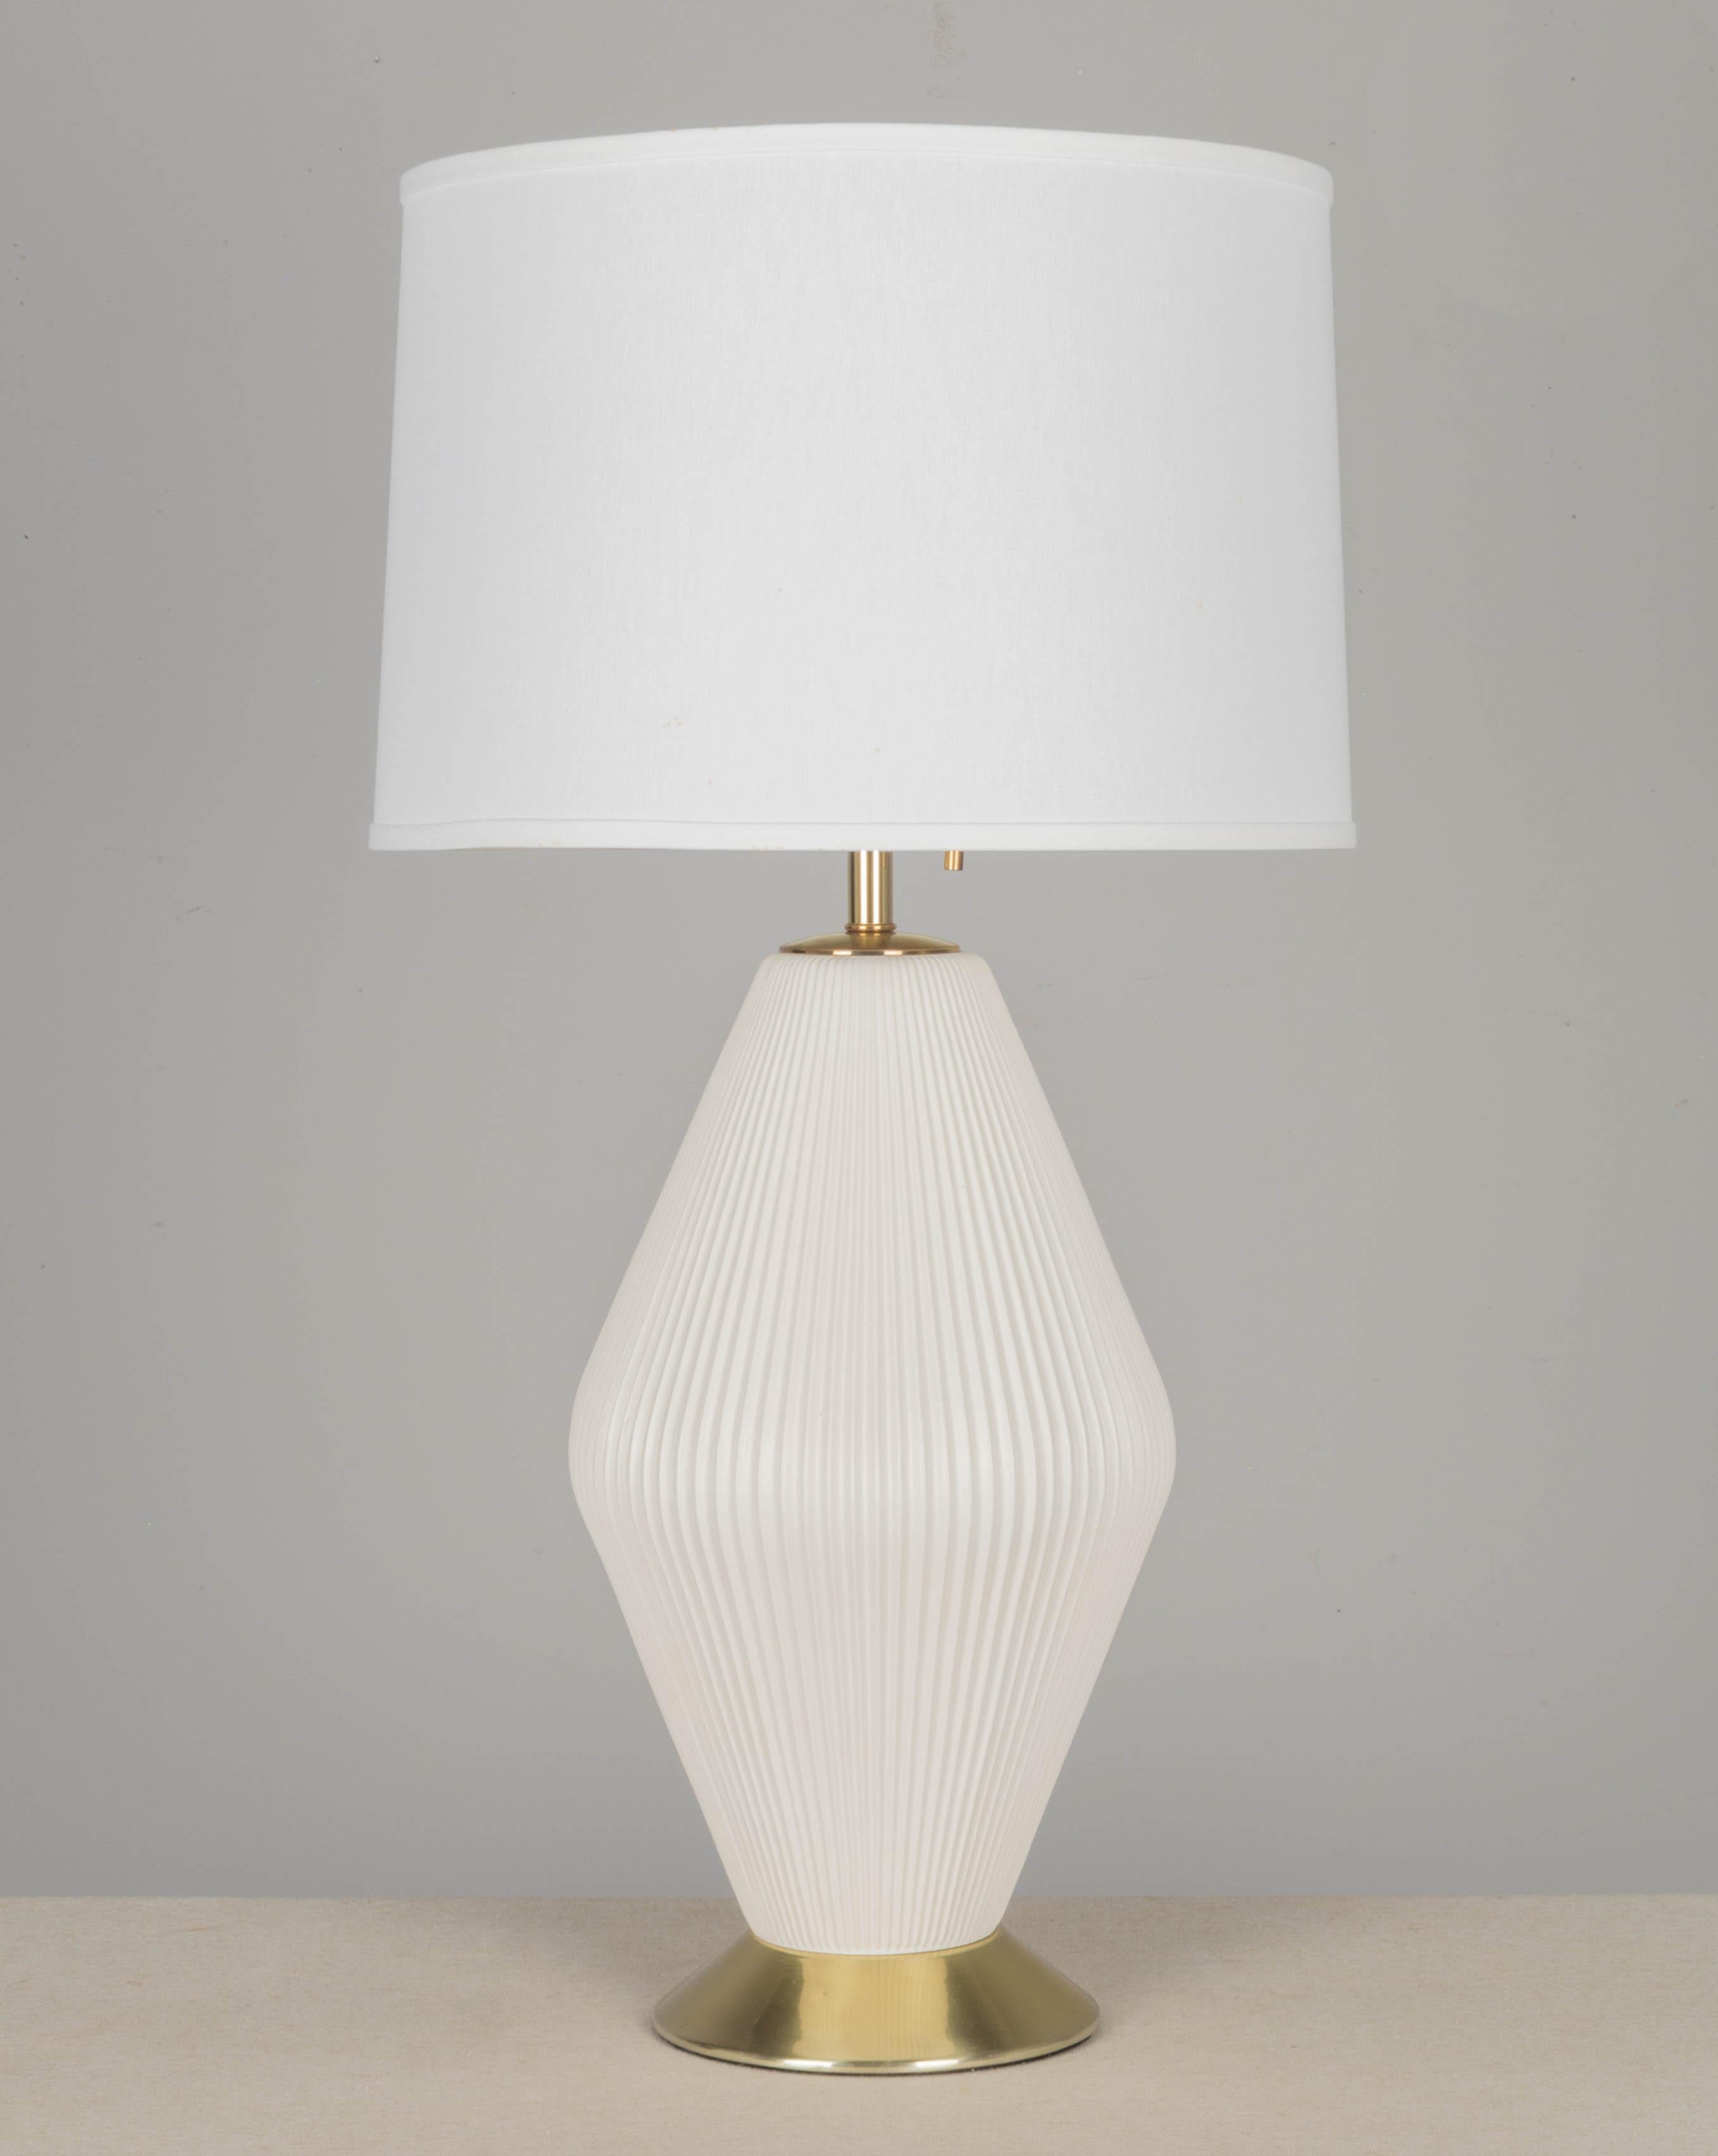 An iconic Midcentury Modern ceramic lamp by Gerald Thurston for Lightolier. Pleated ceramic body with matte white glaze. Brass plated base has light scratches with very small dent. Original 3-bulb socket with brass pull chain. New cord and brass